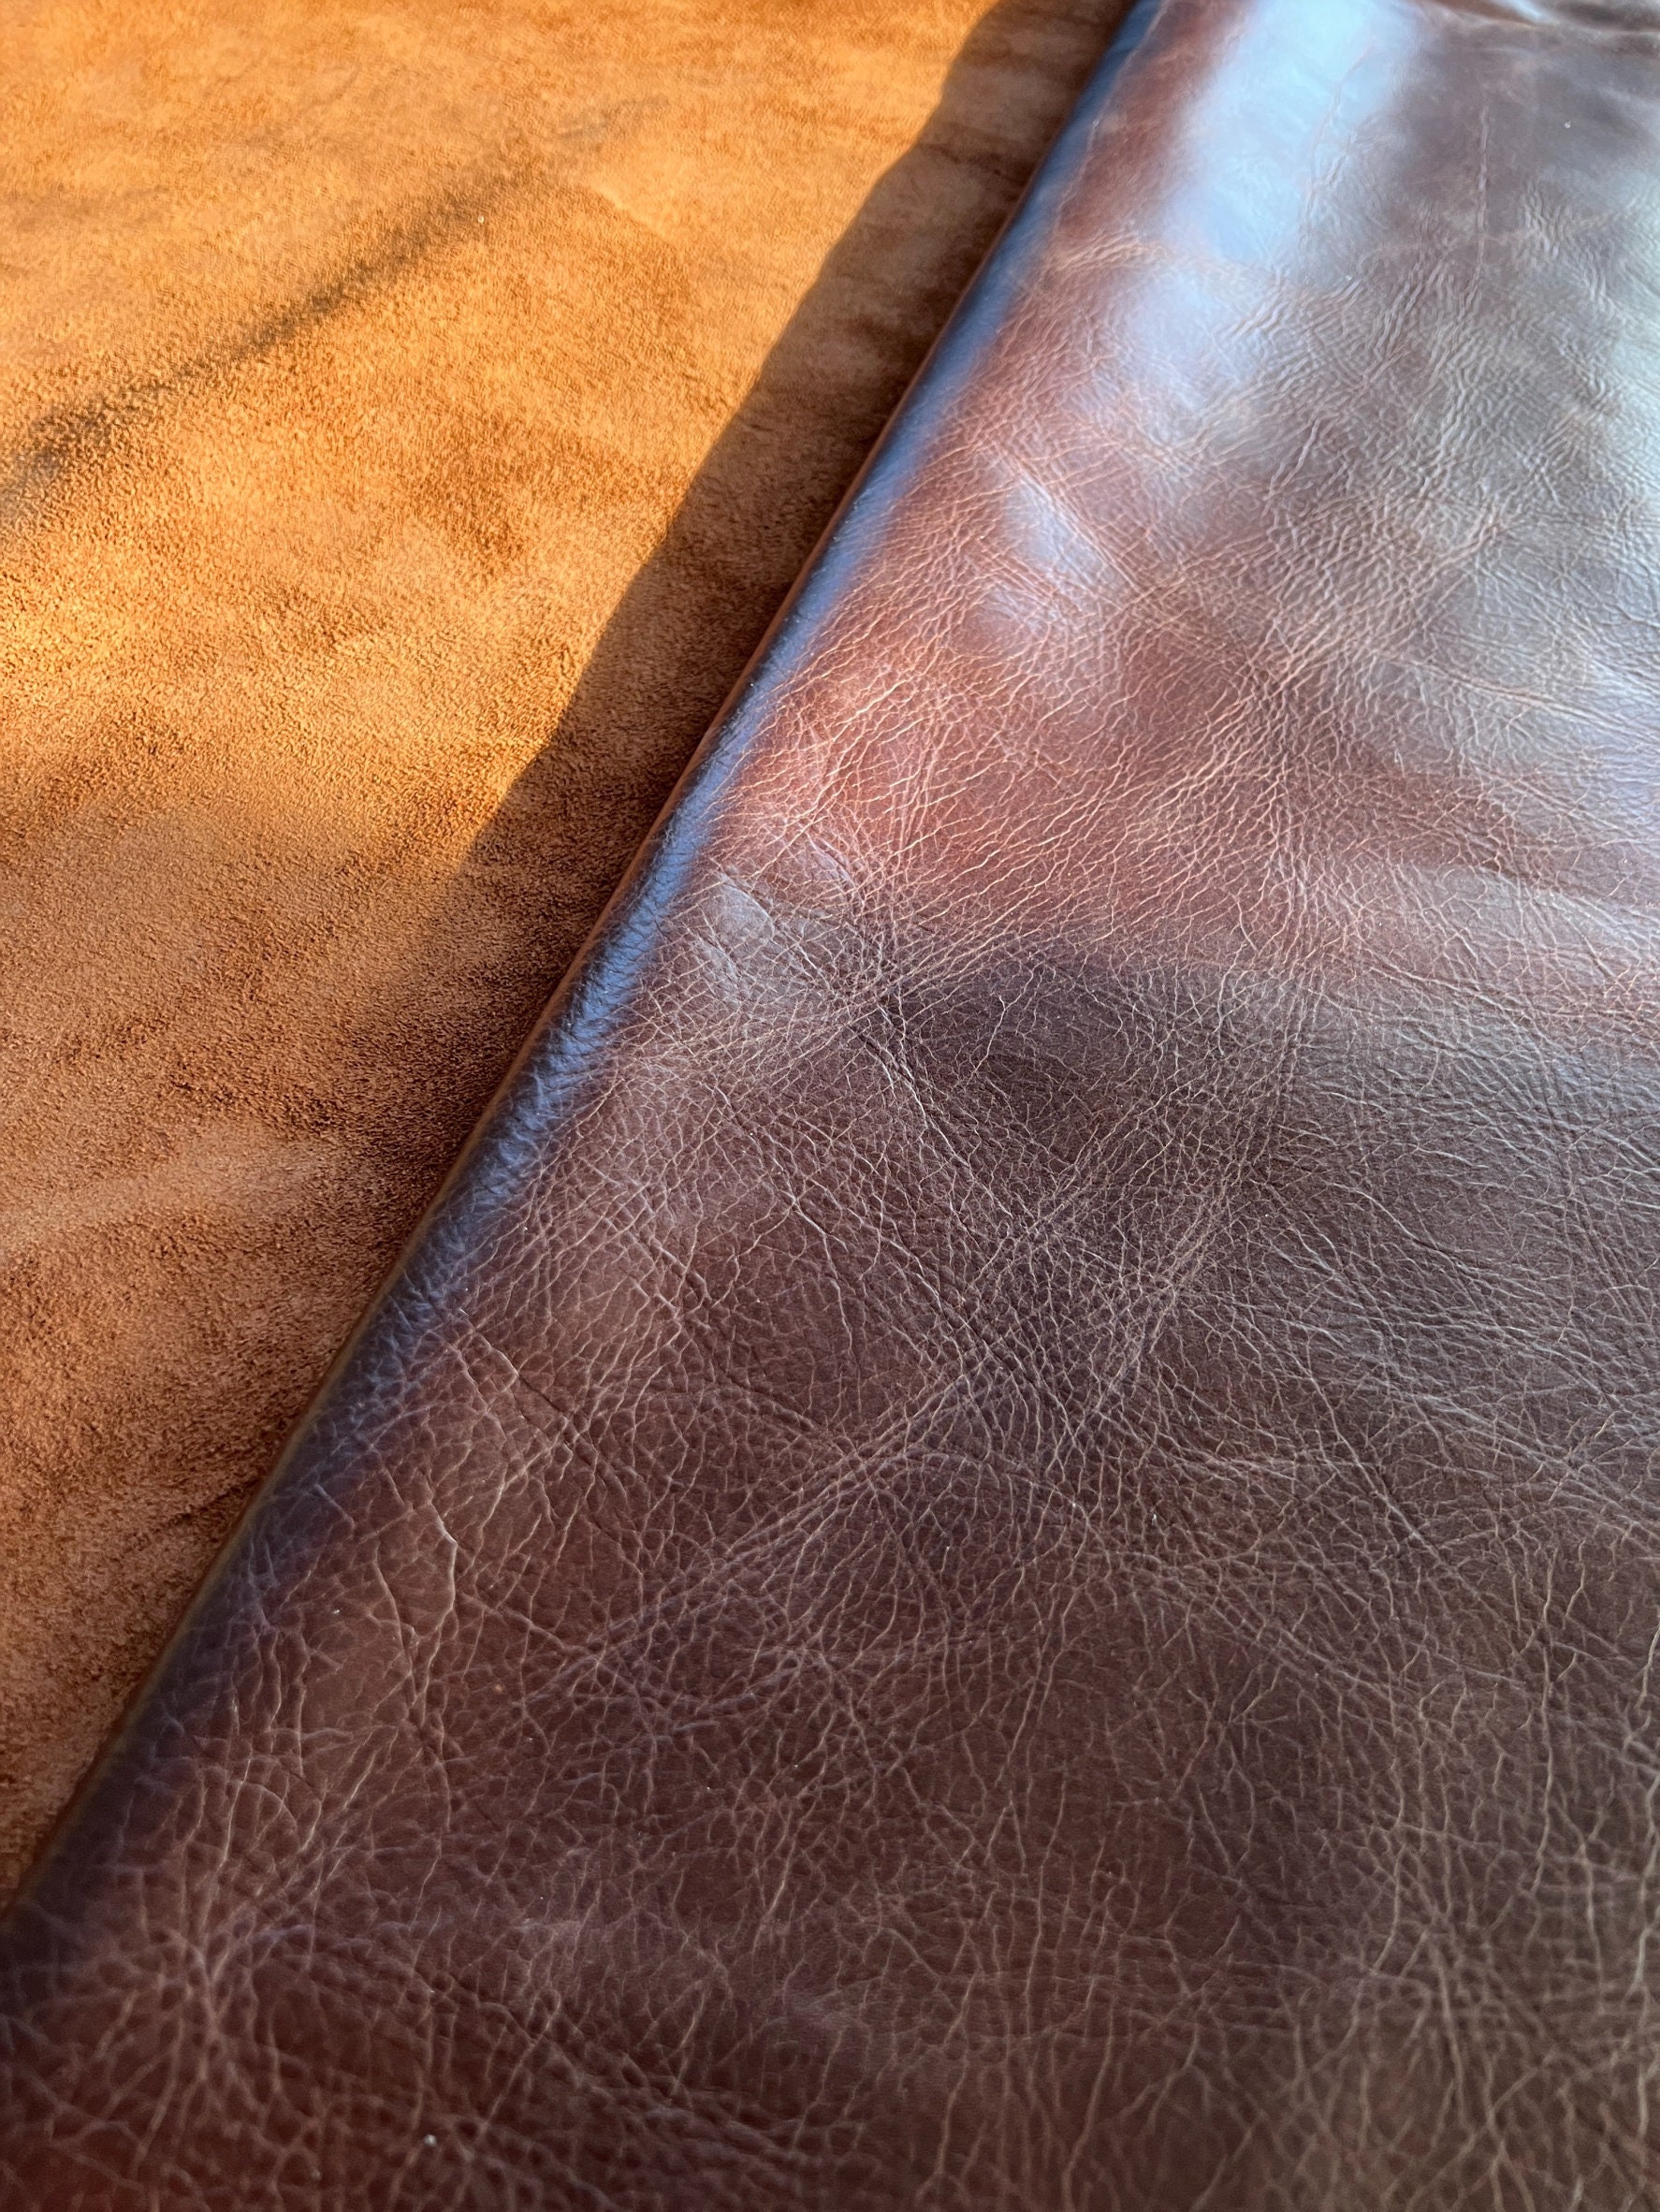 Bourbon Pull up Natural Grain Cowhide Leather Genuine Cow Leather